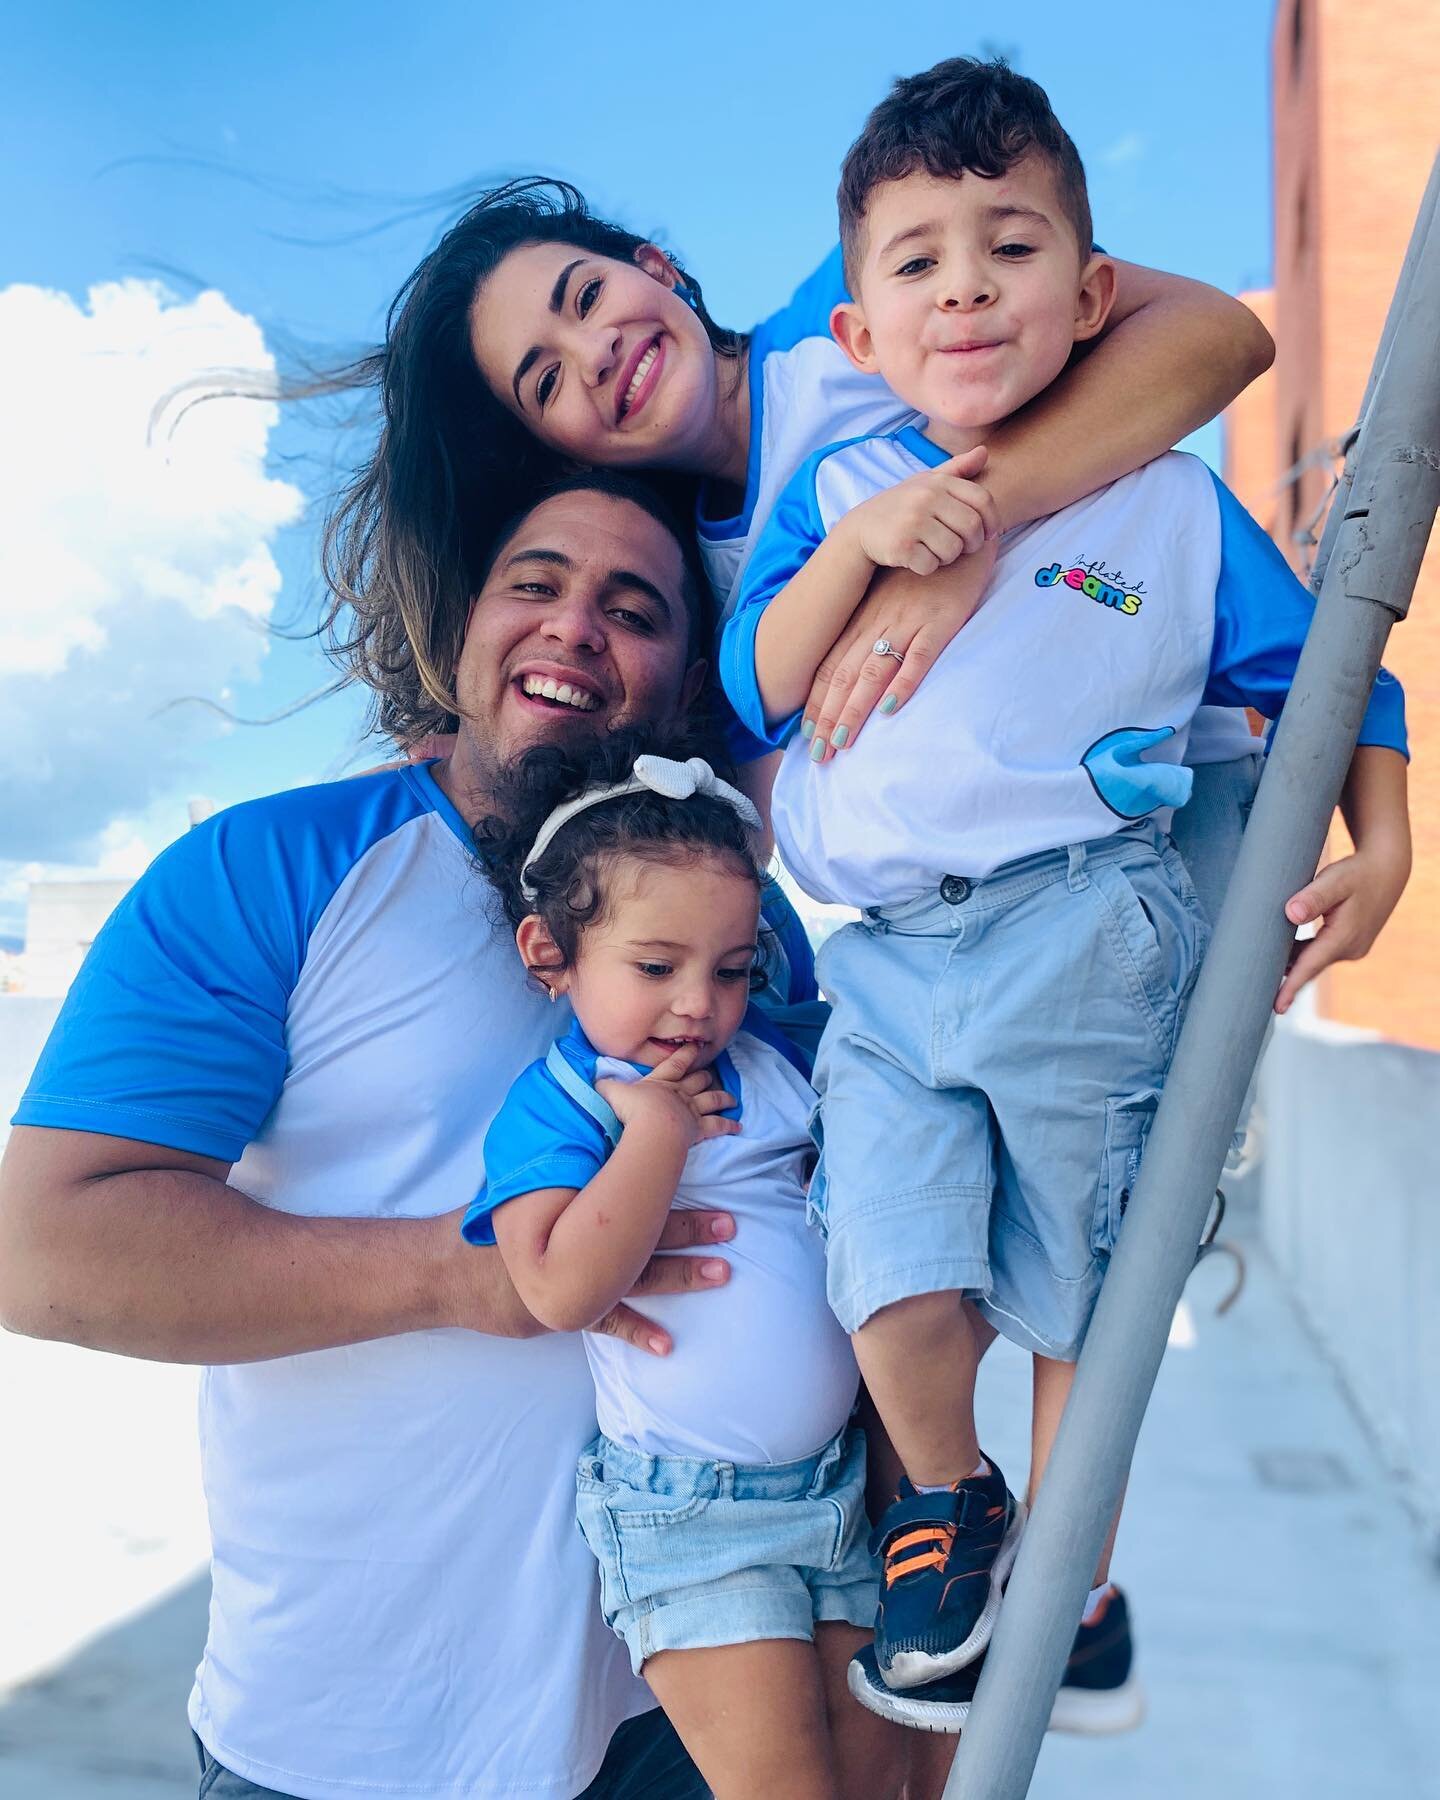 Our #tbt goes to our wonderful time in Venezuela with family for 6 month because of covid last year❤️🇻🇪

While it was difficult to be away from home for such a long time, it was an experience like no other.

We had to reinvent ourselves and come up